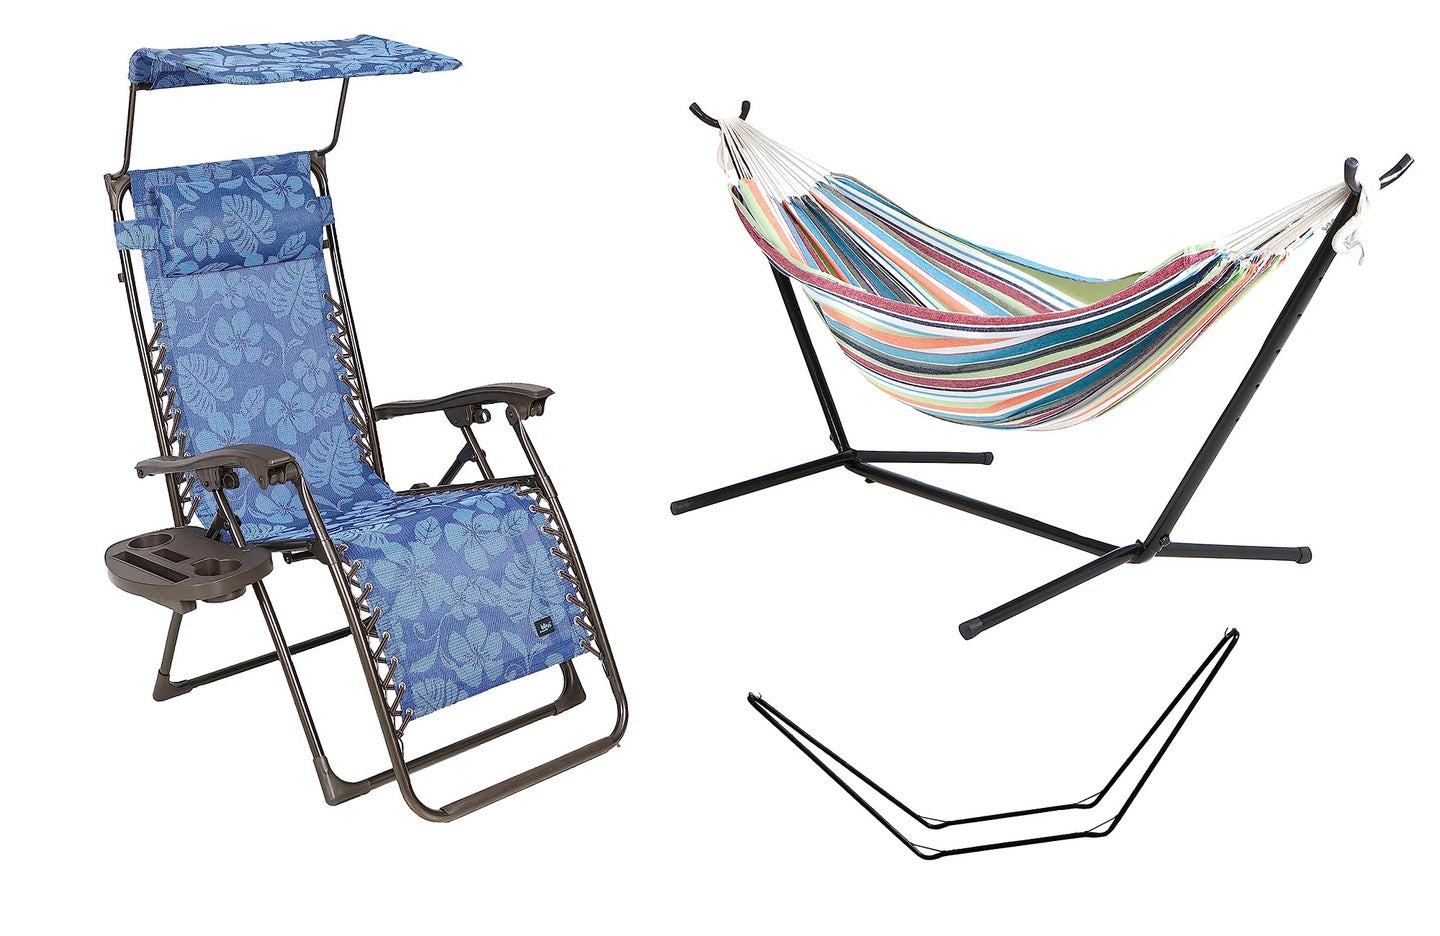 Outfit your backyard this Amazon Prime Day with these deals.